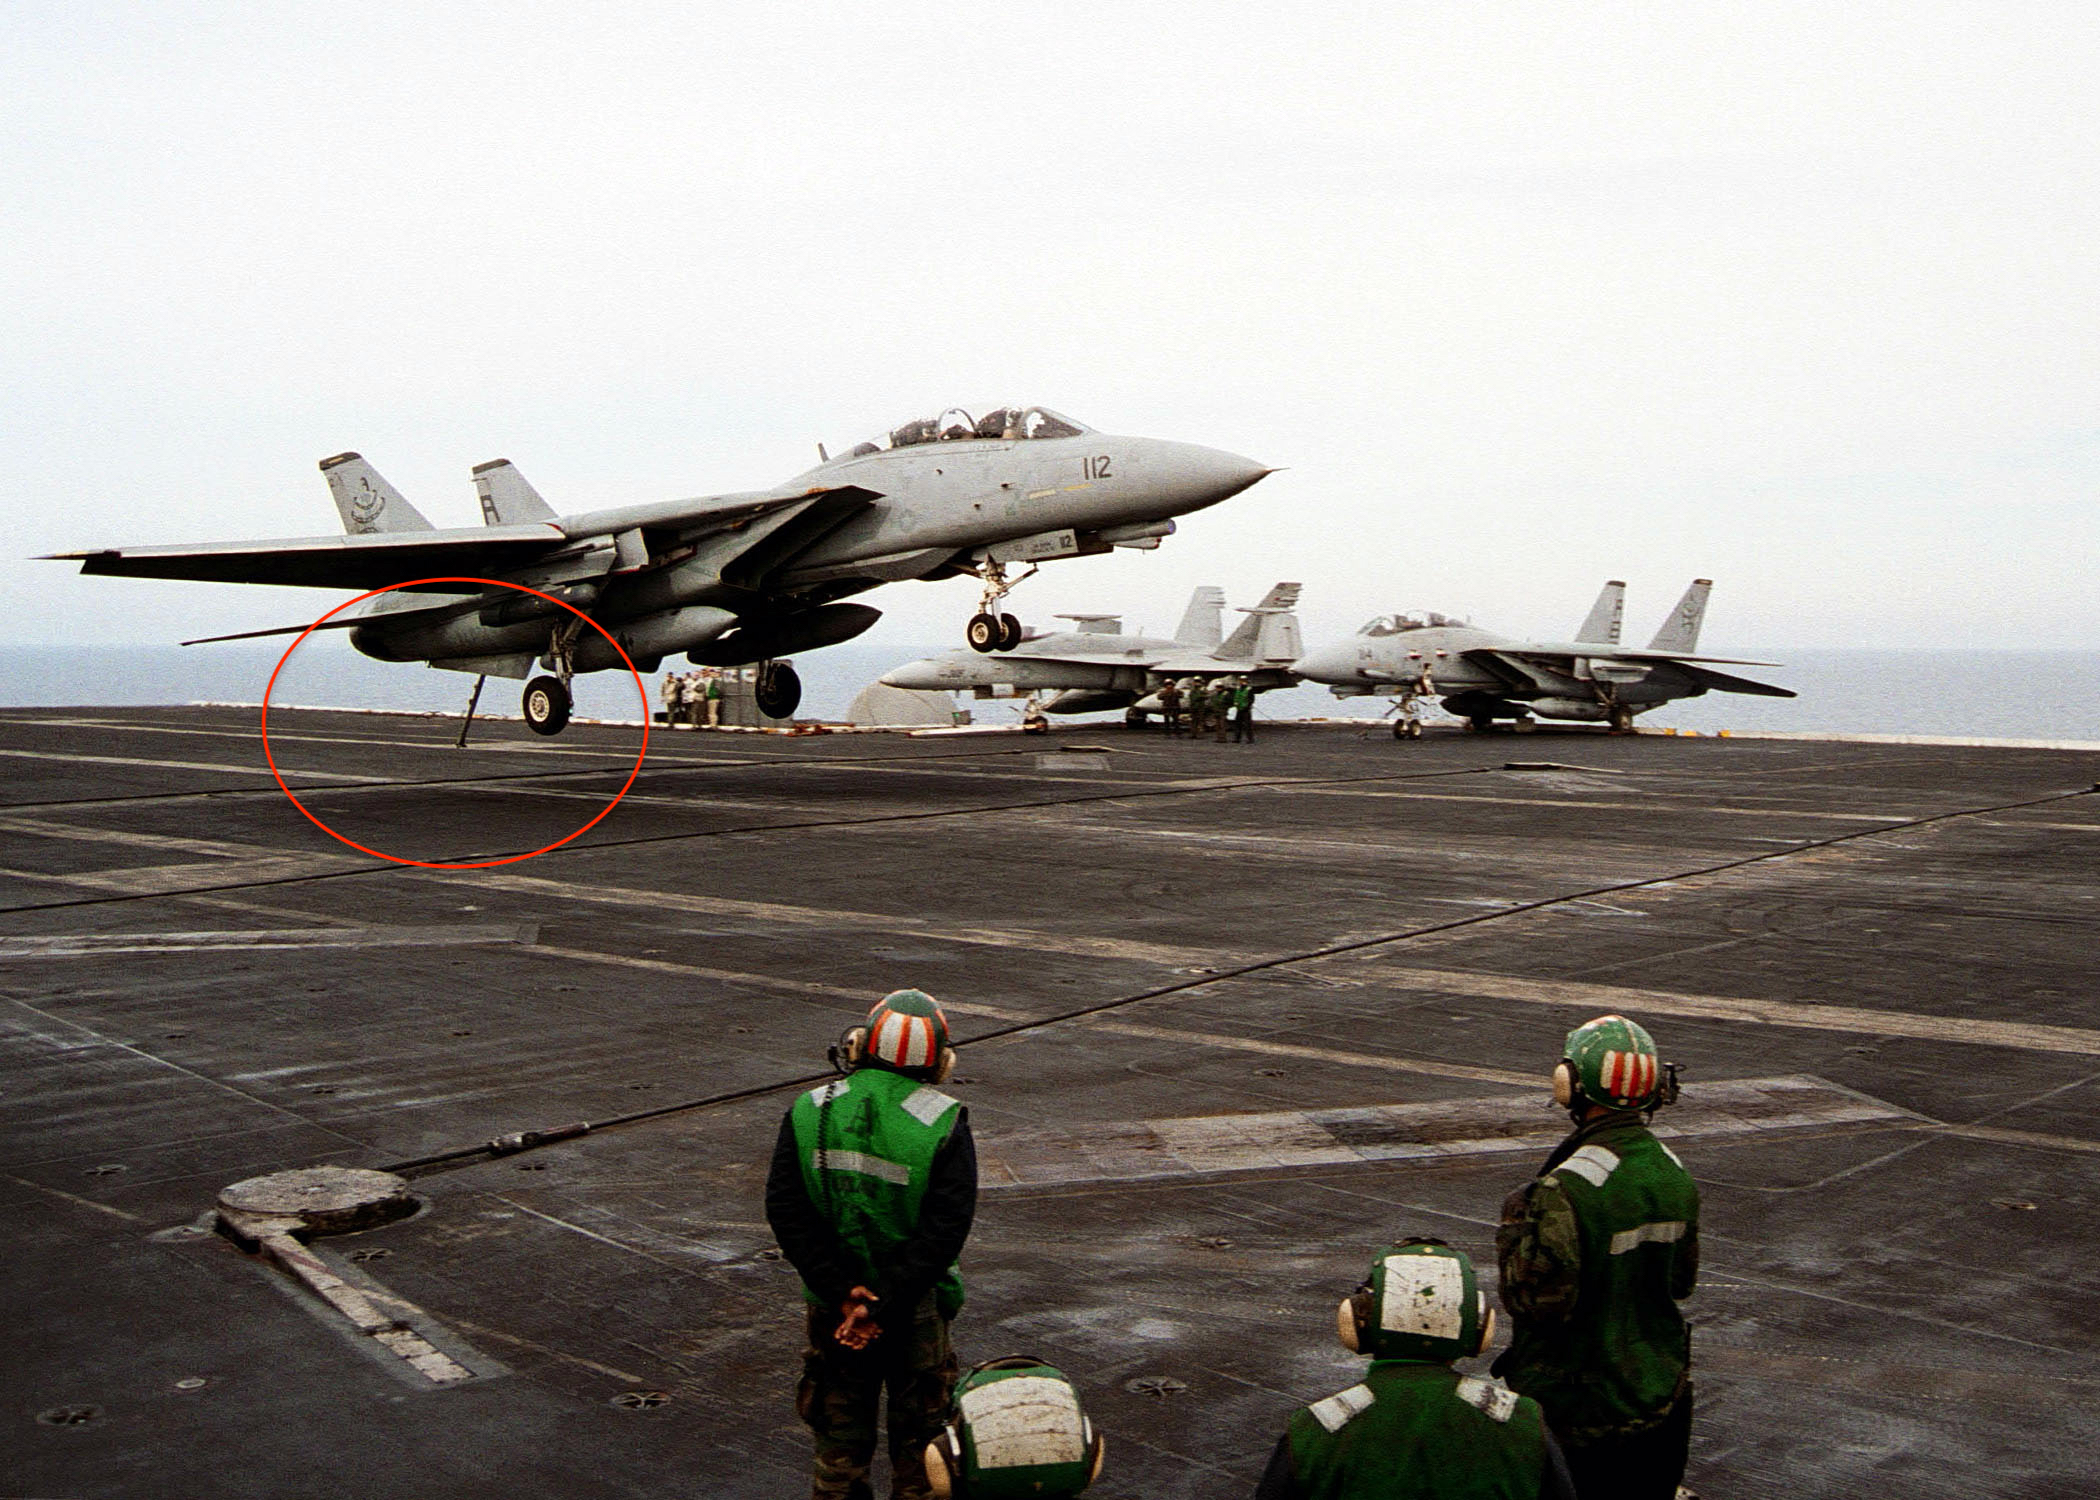 An F-14 Tomcat jet fighter assigned to the "Diamondbacks" of Fighter Squadron One Zero Two (VF-102) descends to make an arresting gear landing on the flight deck.